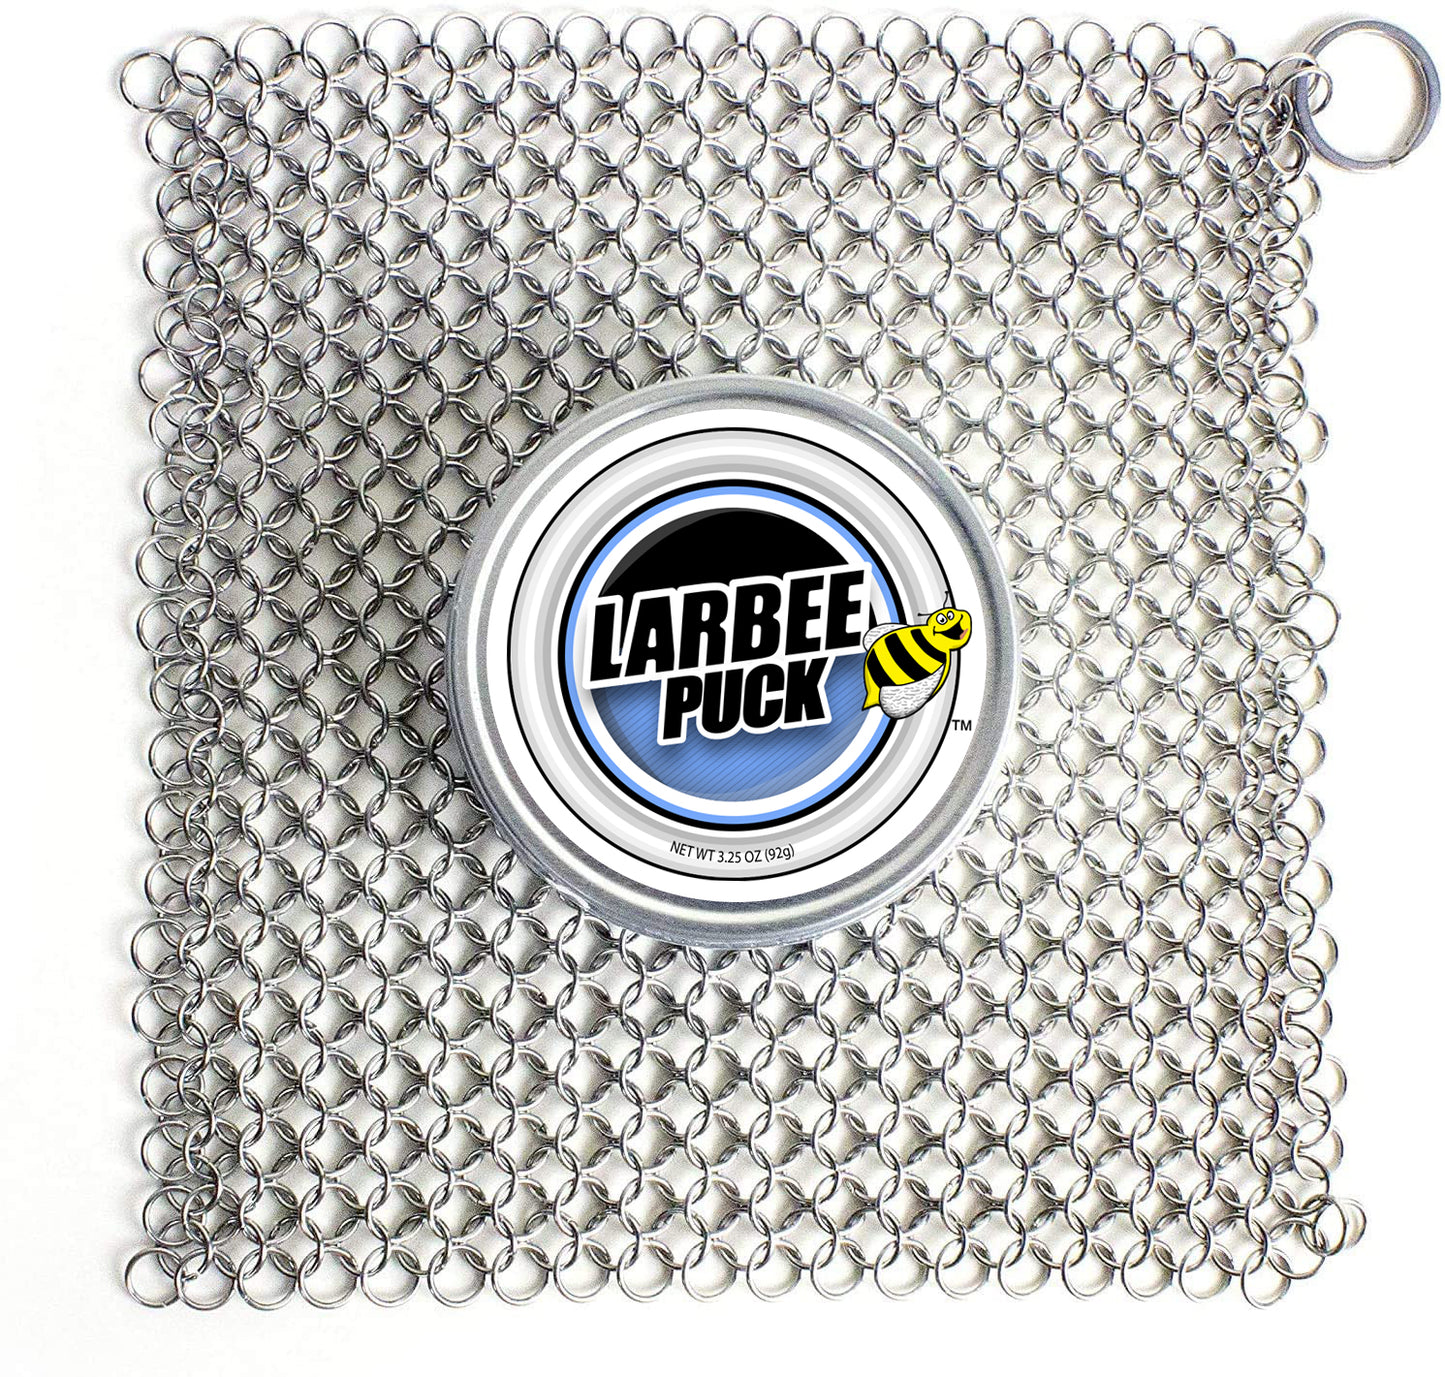 https://crisbee.org/cdn/shop/products/ChainMailScrubberCastIronCleaner_LarbeePuck.jpg?v=1643848870&width=1445